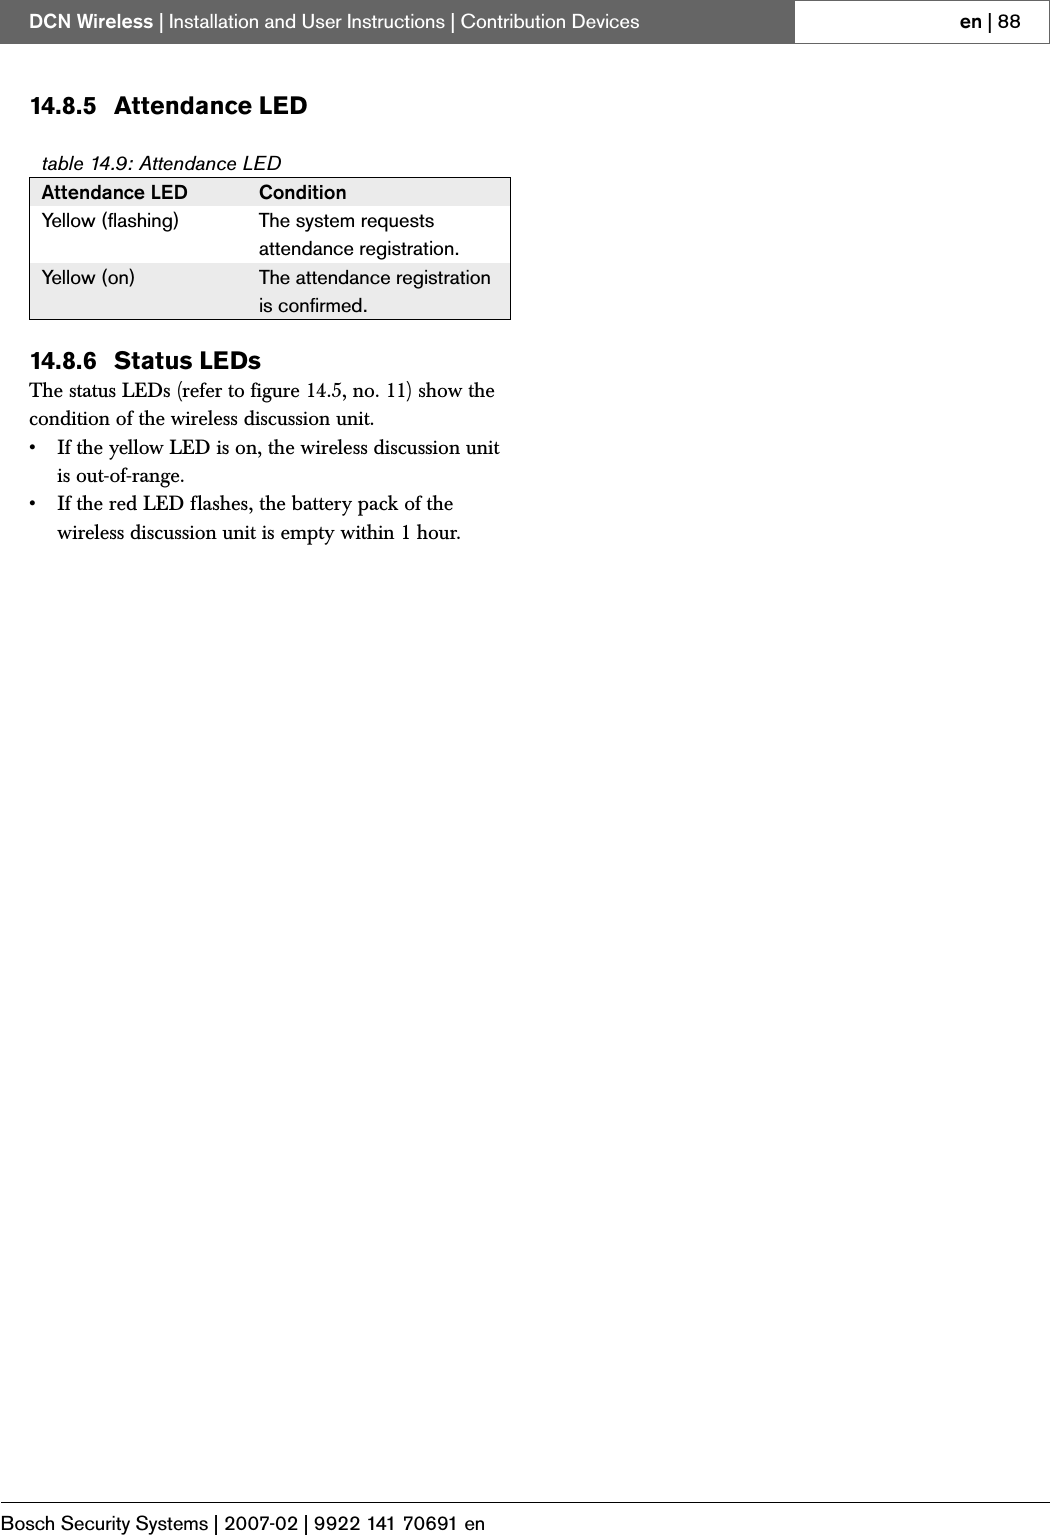 Page 59 of Bosch Security Systems DCNWAP Wireless Access Point User Manual Part 2